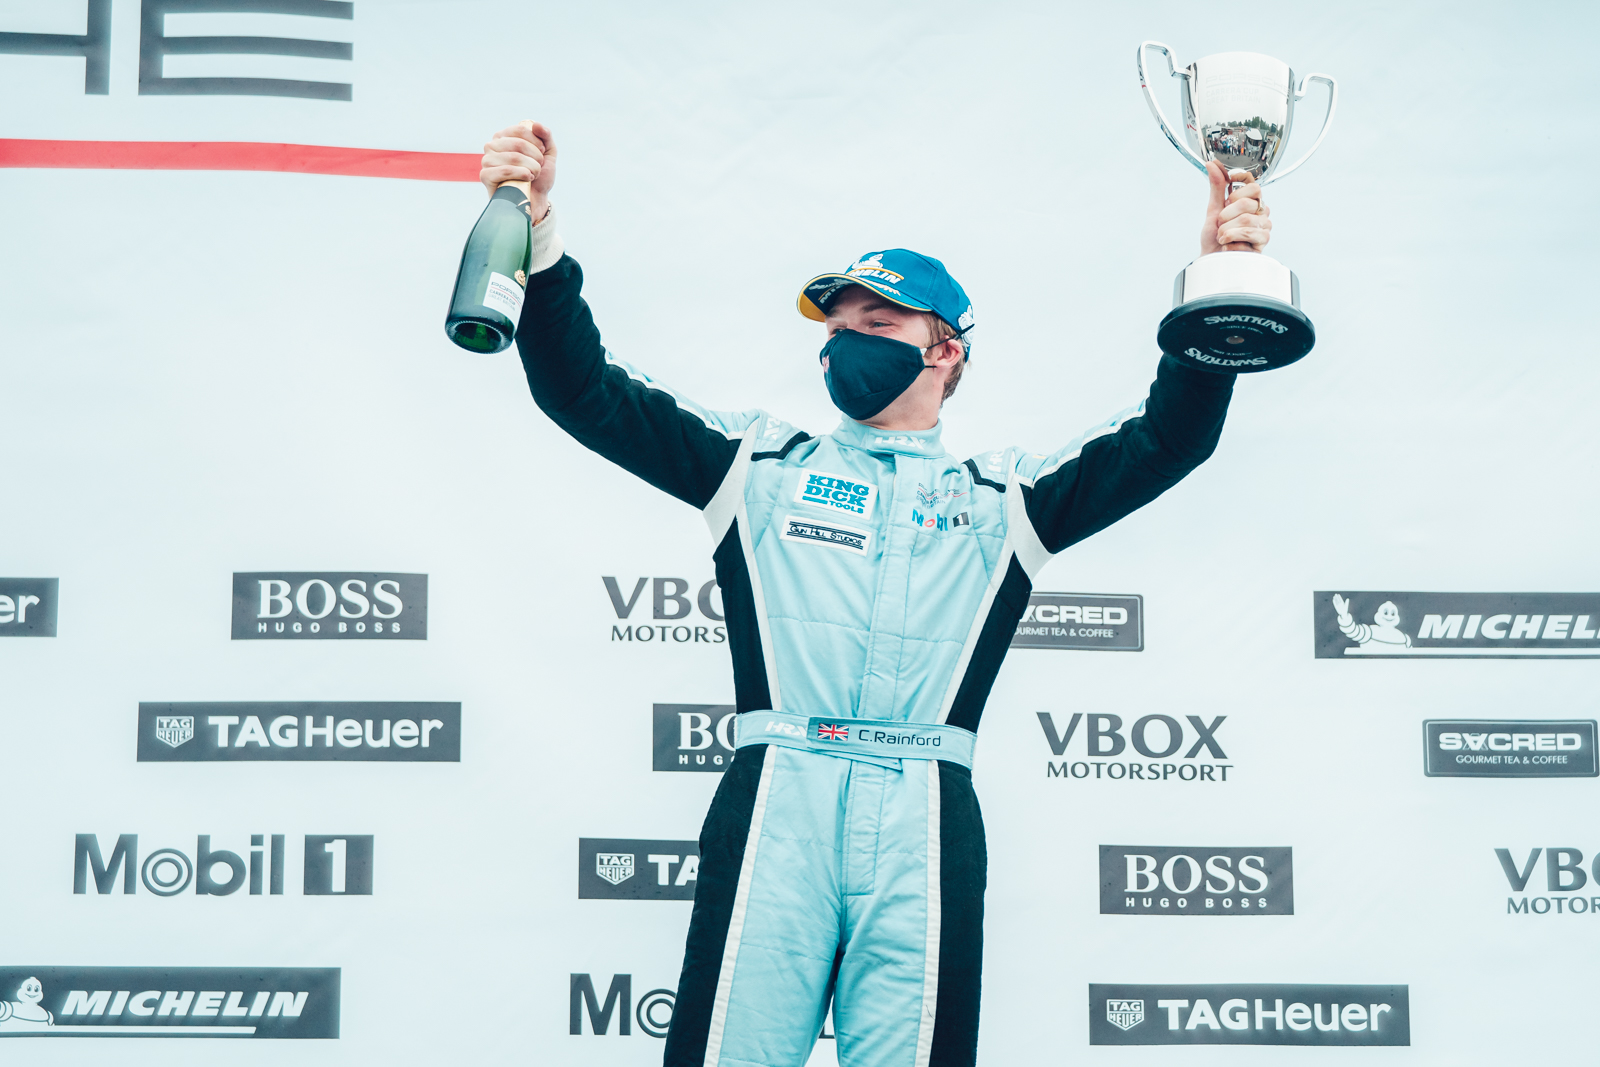 Victory for Charles Rainford at Porsche Carrera Cup Brands Hatch